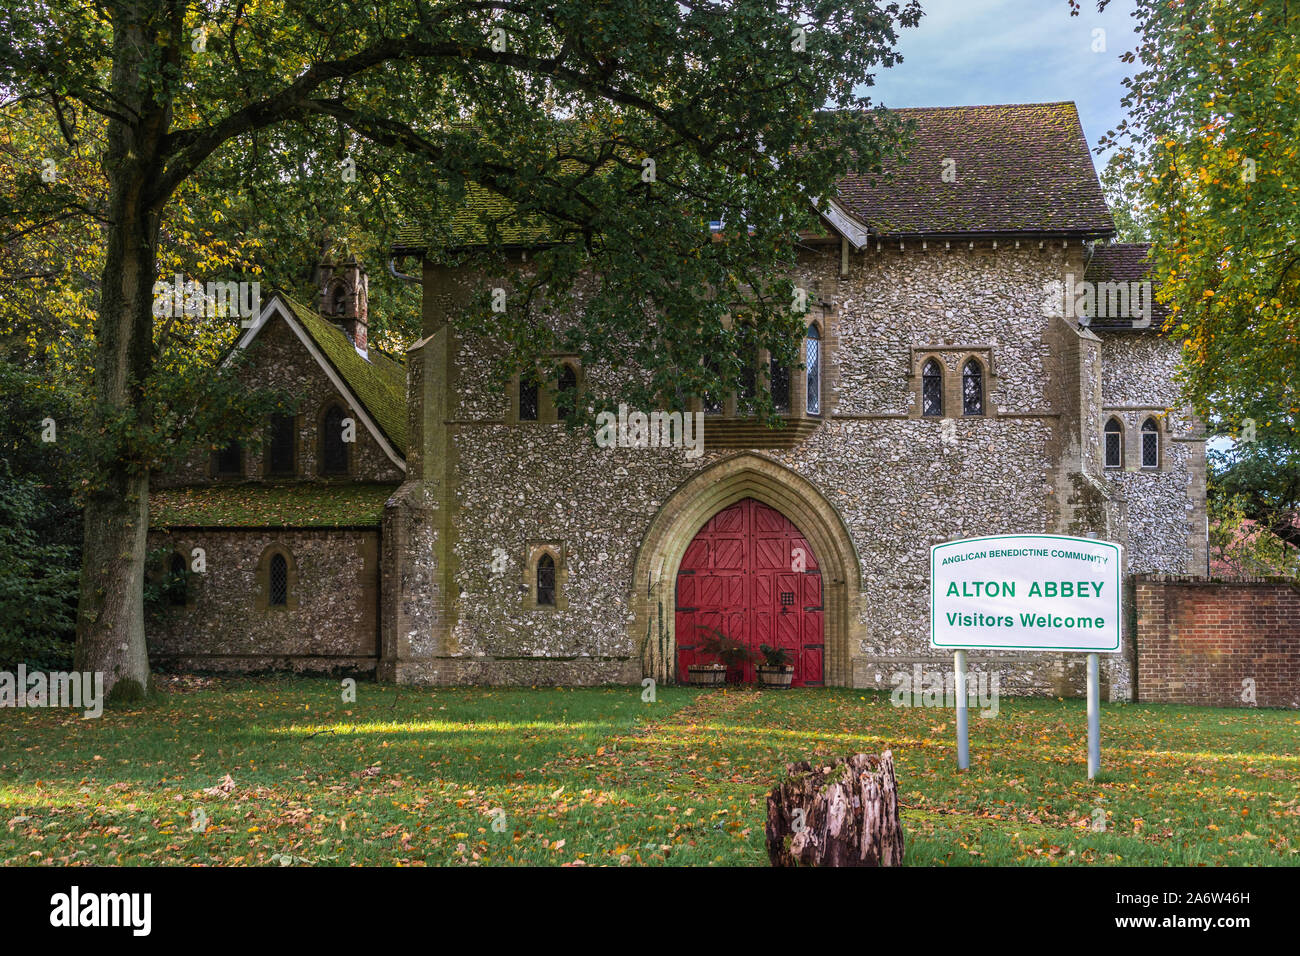 Entrance to Alton Abbey an old Anglican Benedictine Monastery in Hampshire, England, UK Stock Photo